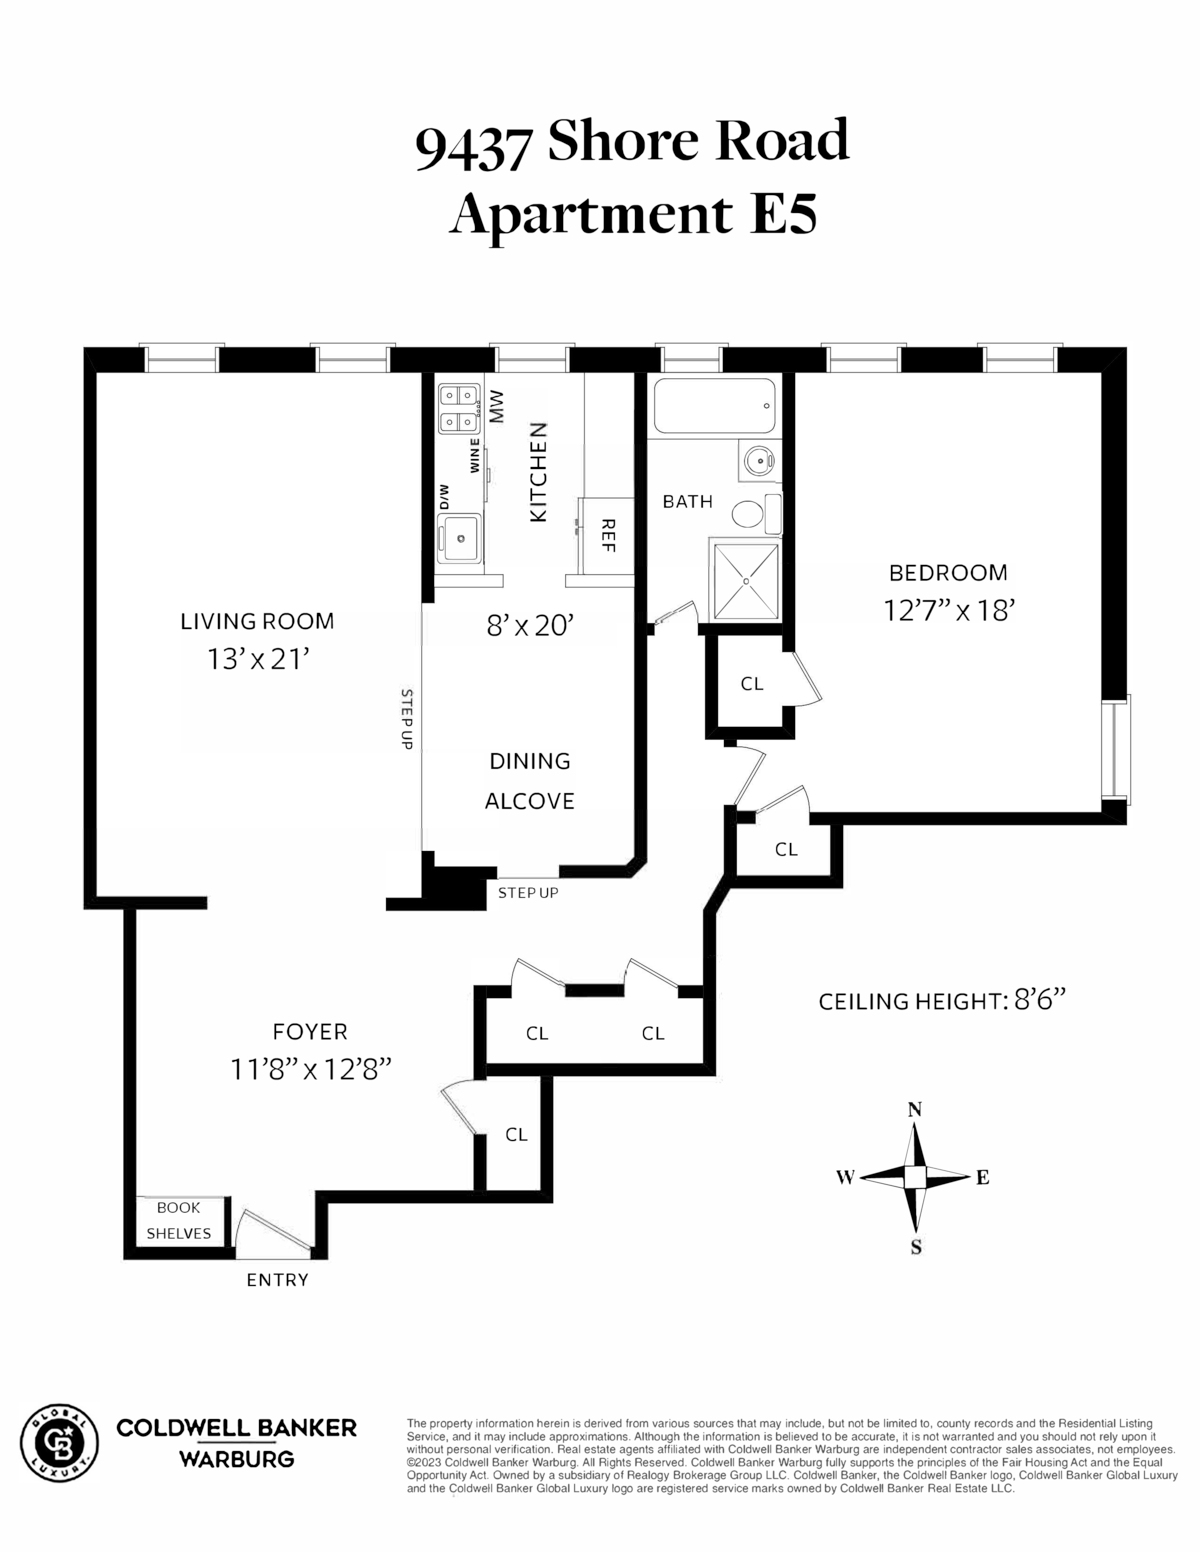 floorplan showing foyer and living room on one side of the apt and bedroom on the other